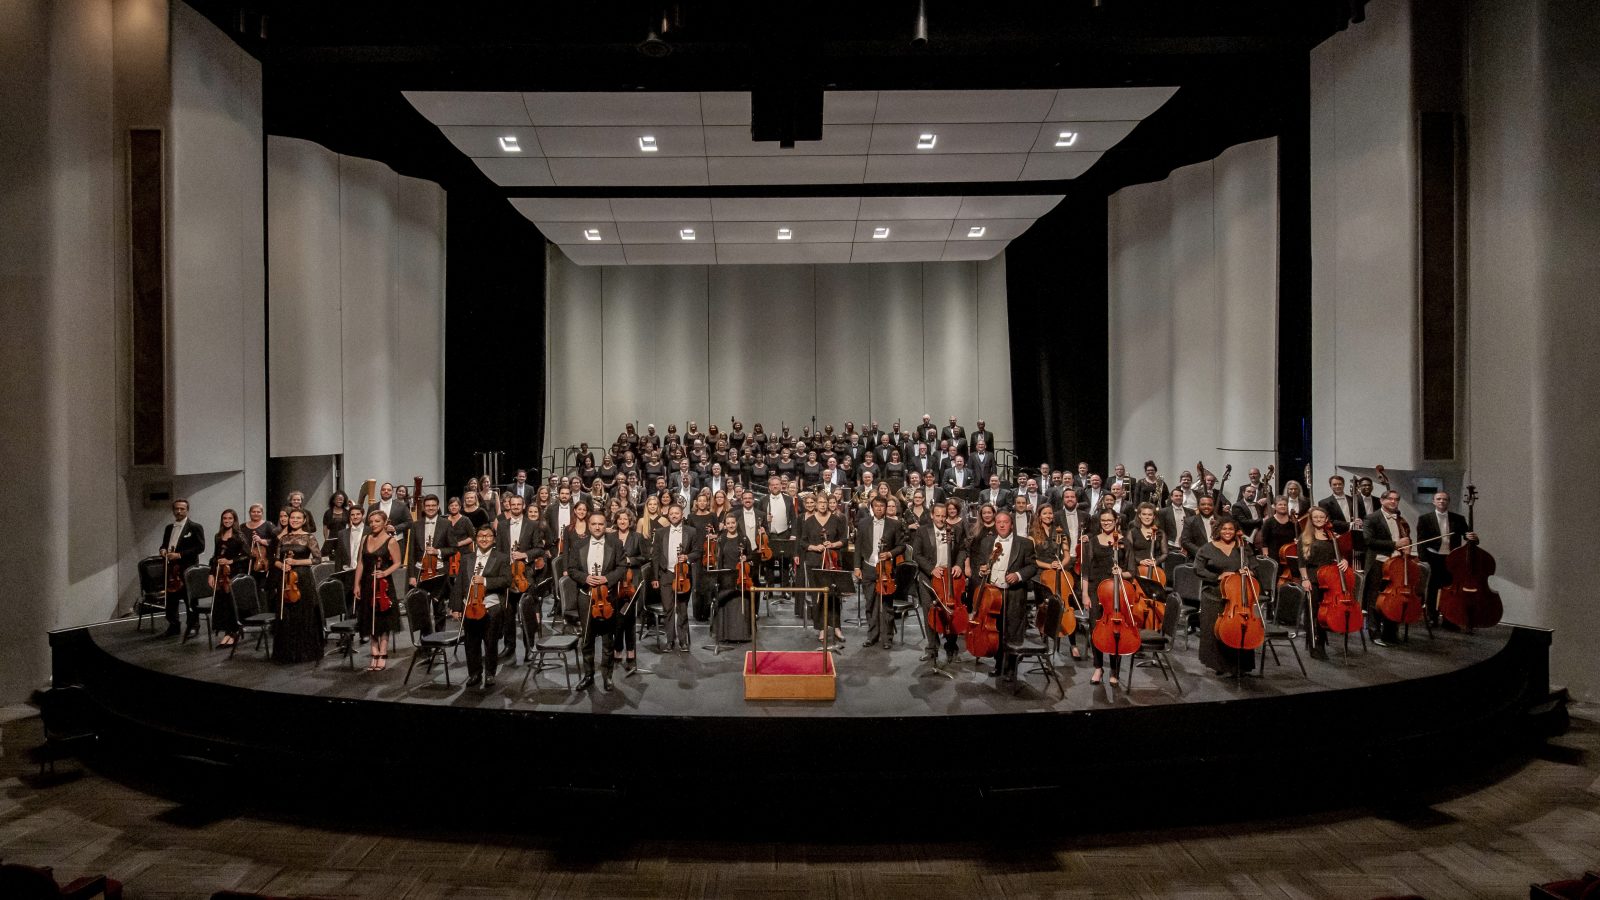 About The Savannah Philharmonic Orchestra and Chorus